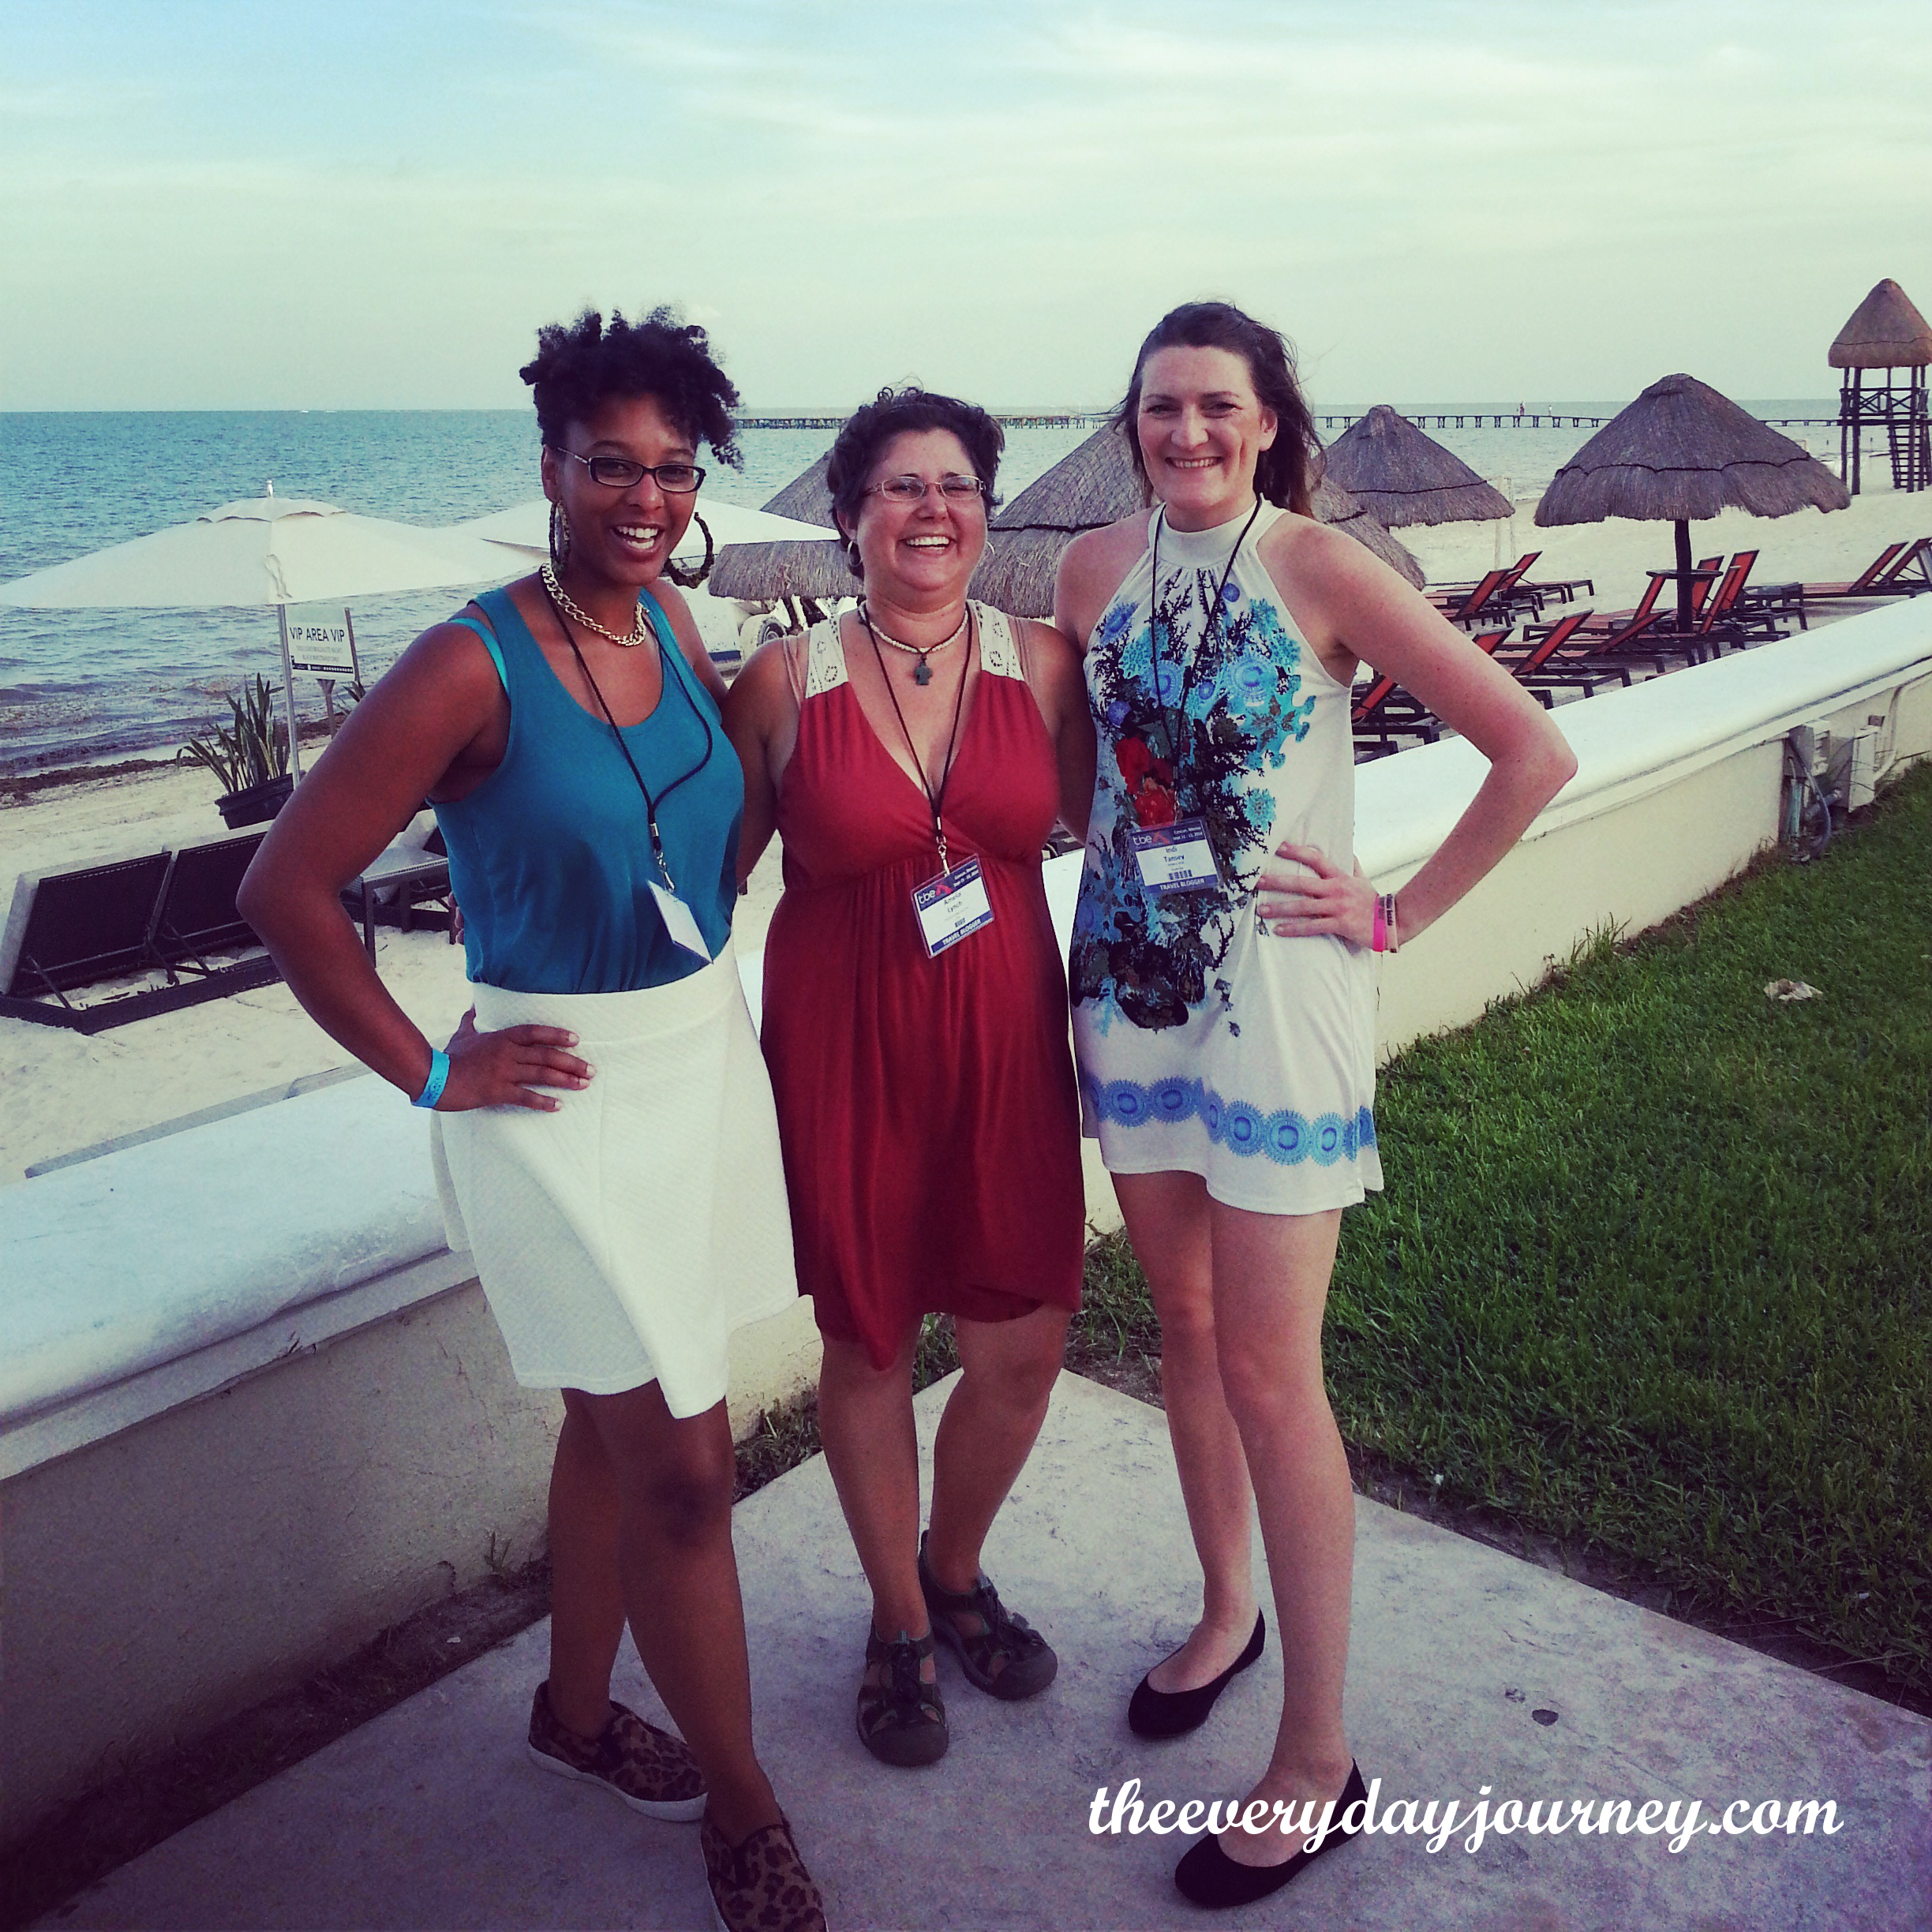 Bloggers after hours: Gypsy Jaunt, me and Indiana June.